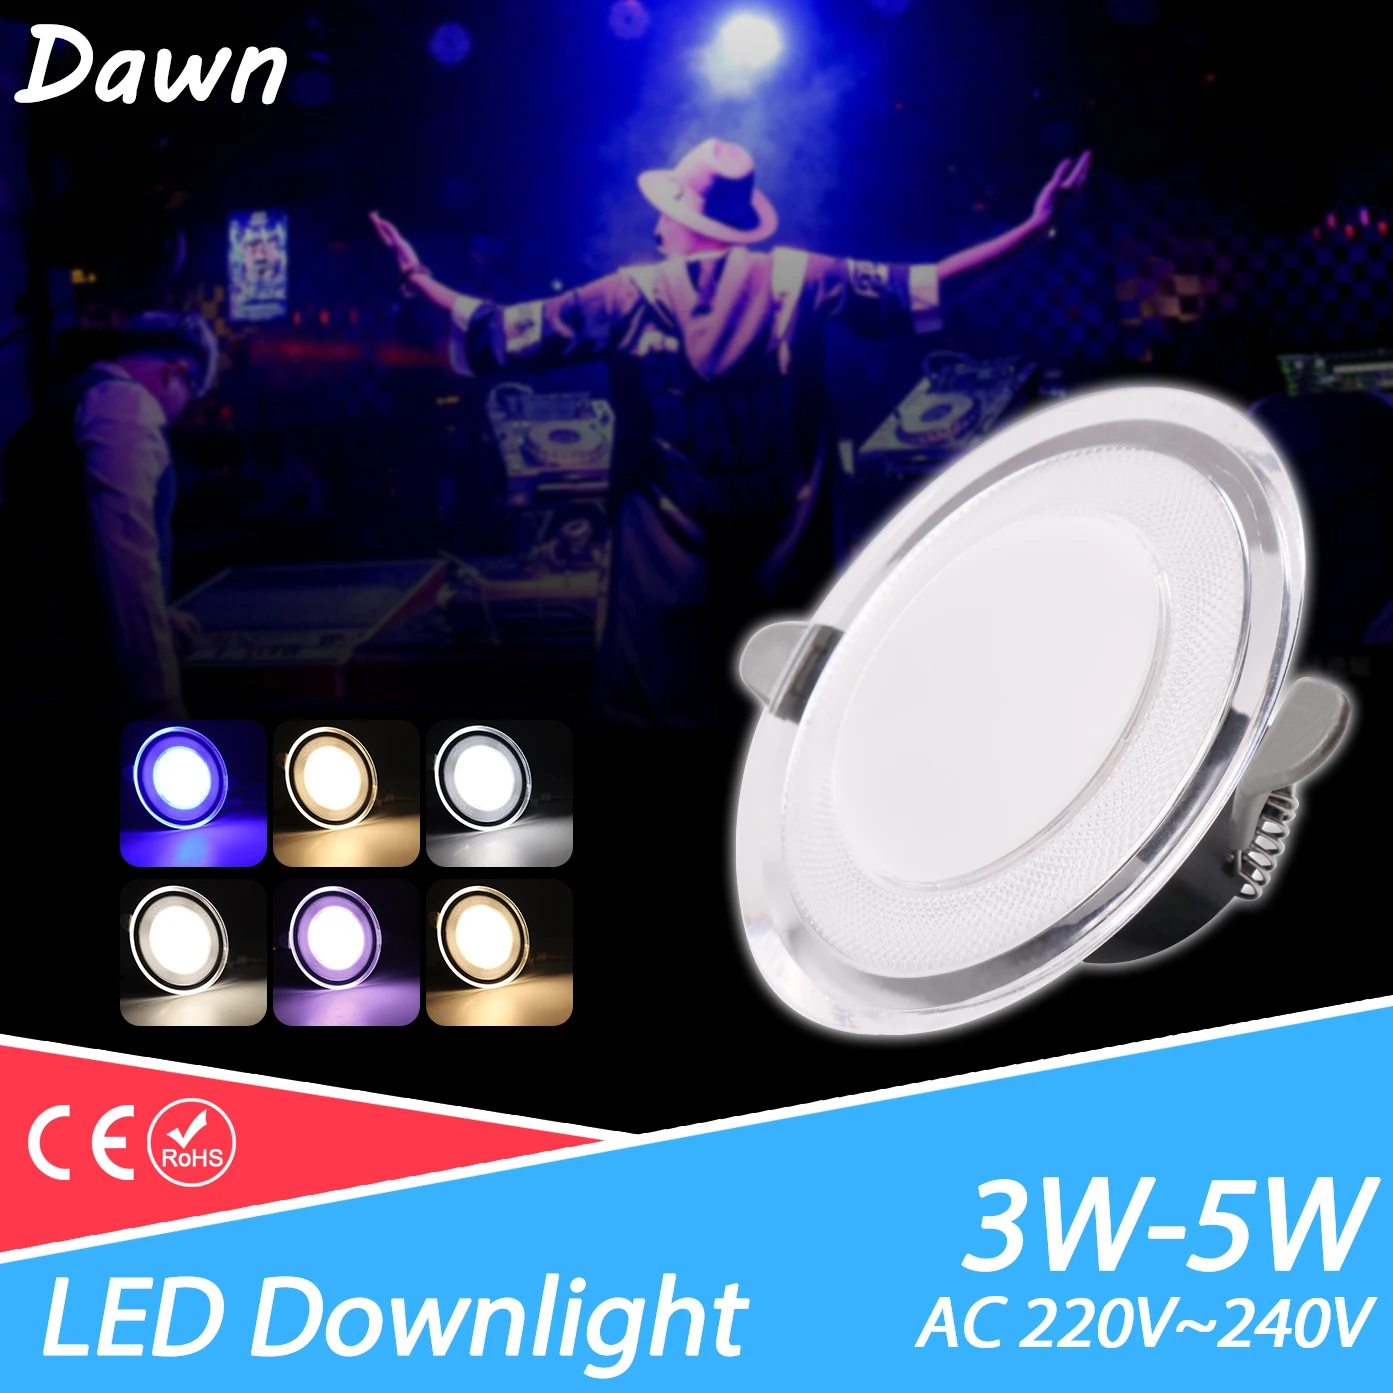 new Downlight 3W 5W ceiling led downlight AC220V six color recessed led downlight Kitchen living room Indoor recessed light spot